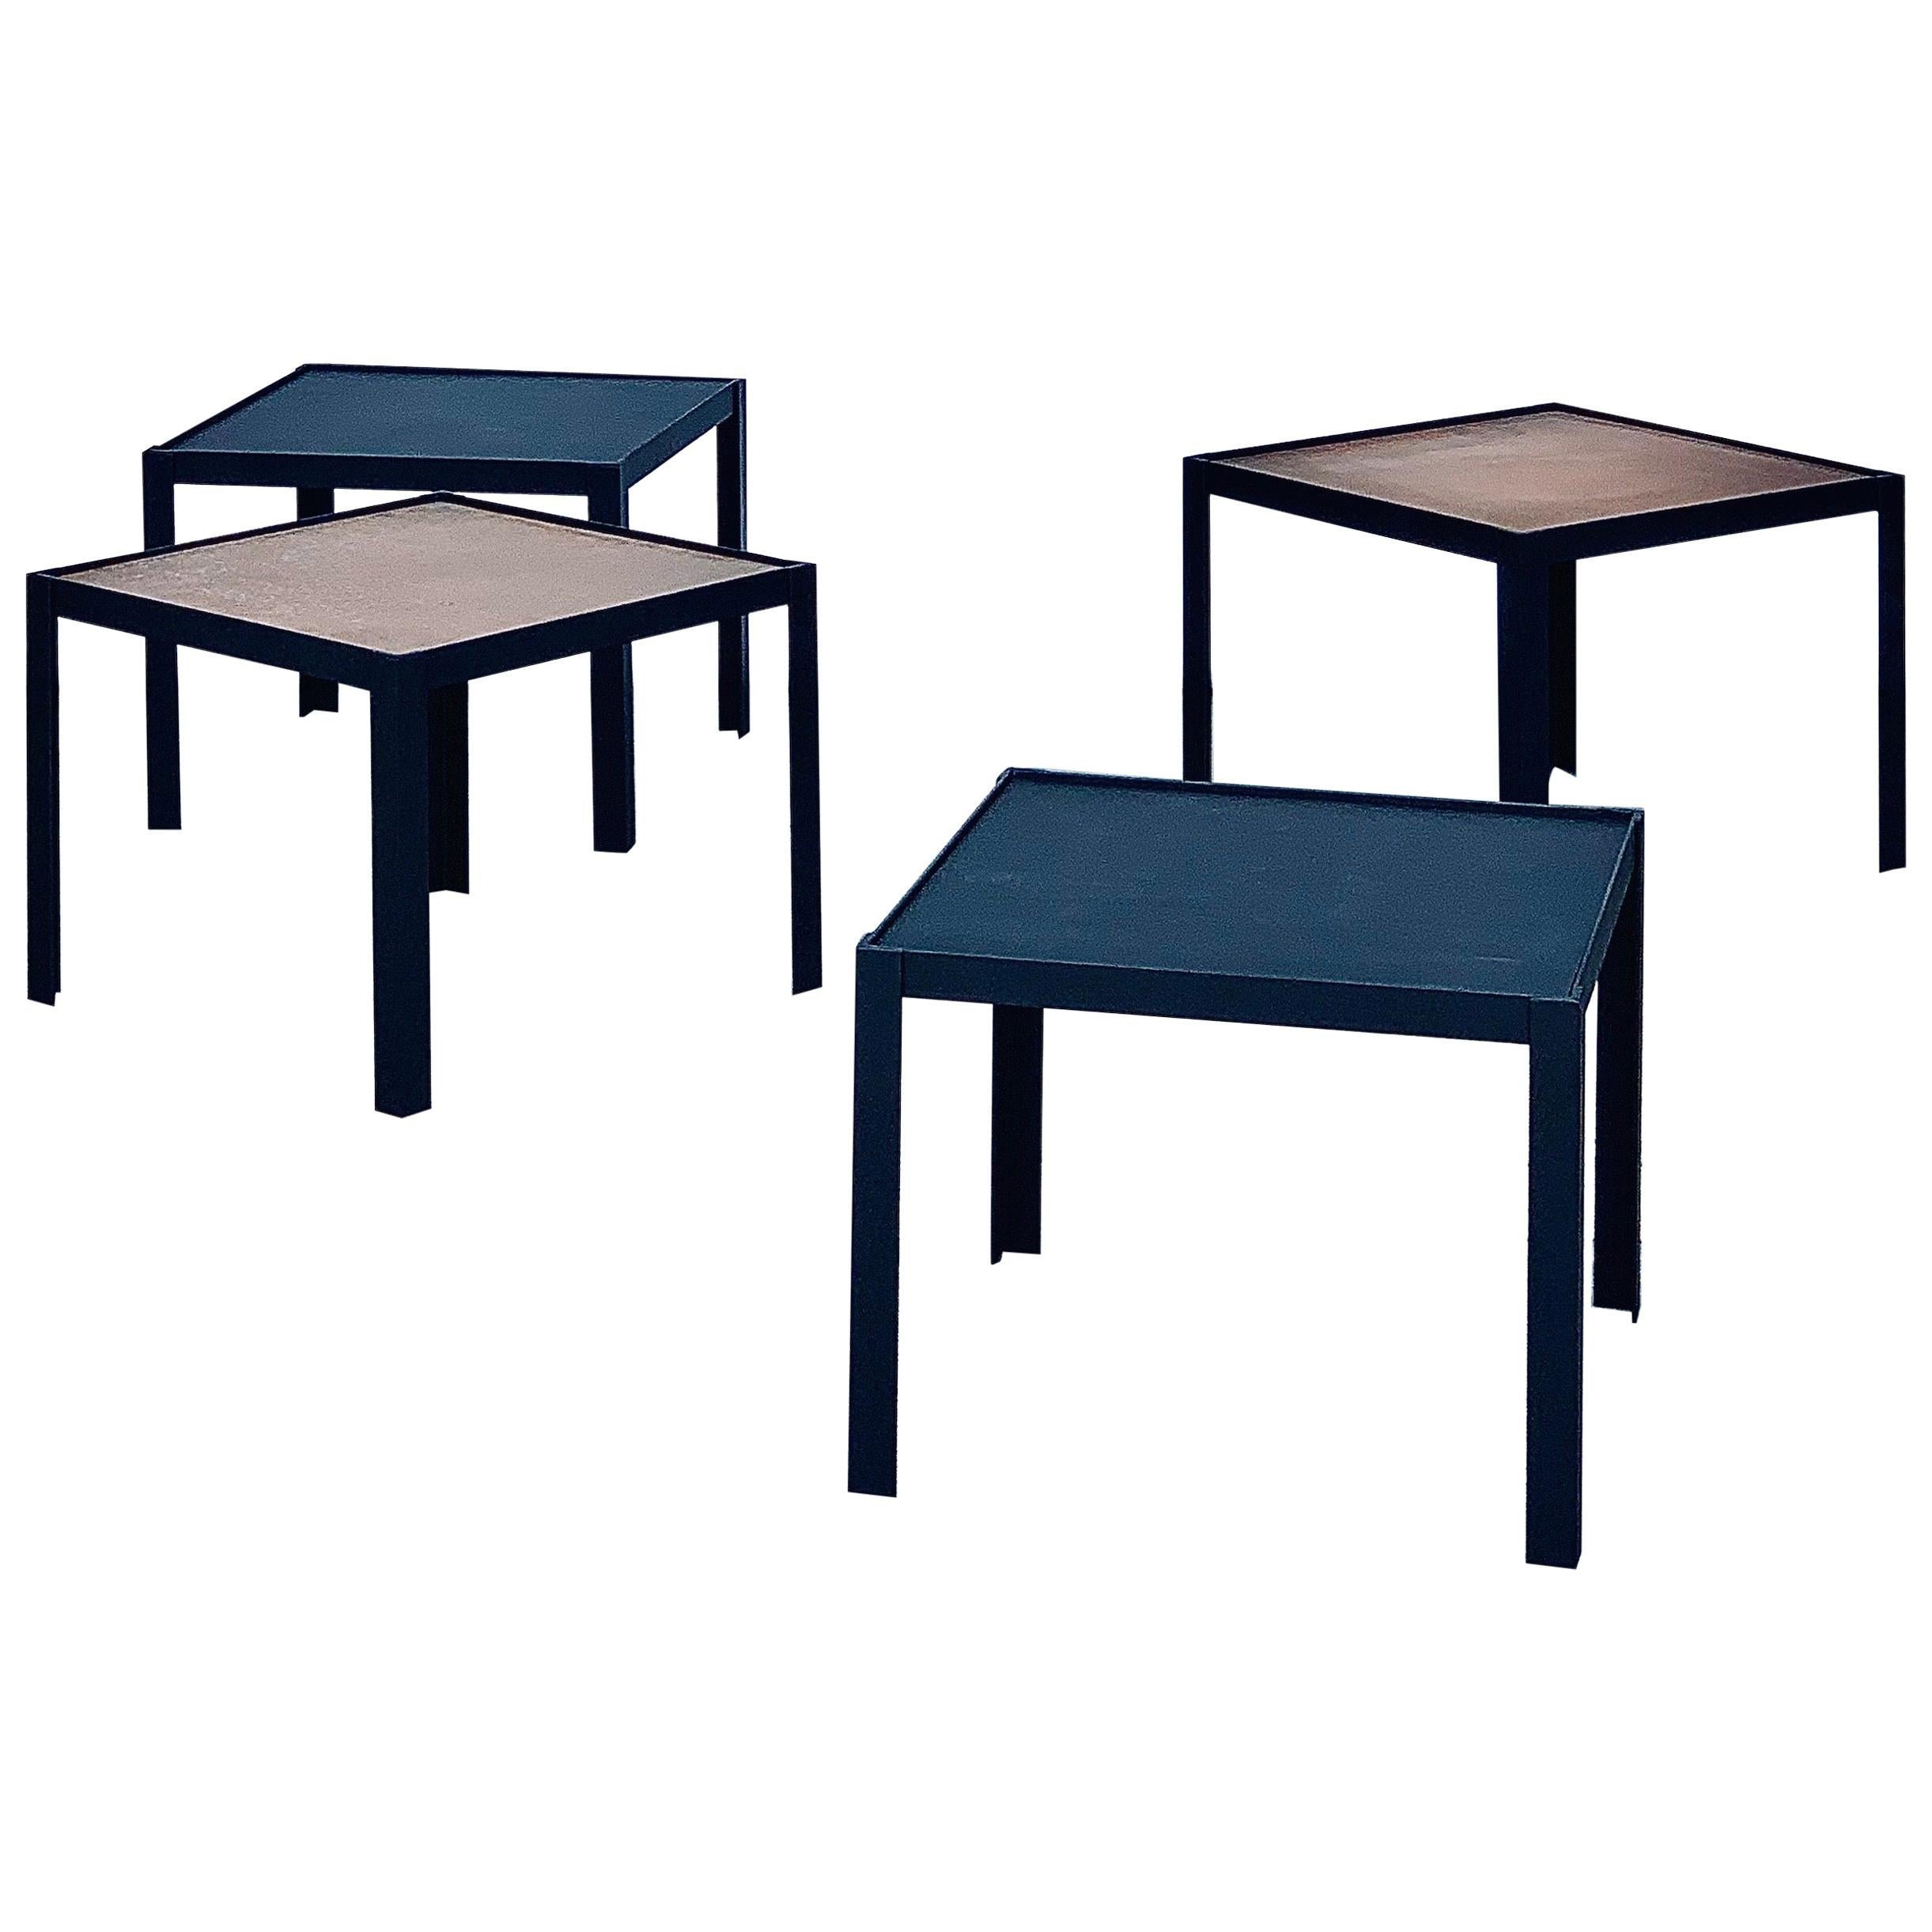 4 'Pion' Black Leather and Patinated Brass Occasional Tables by Design Frères